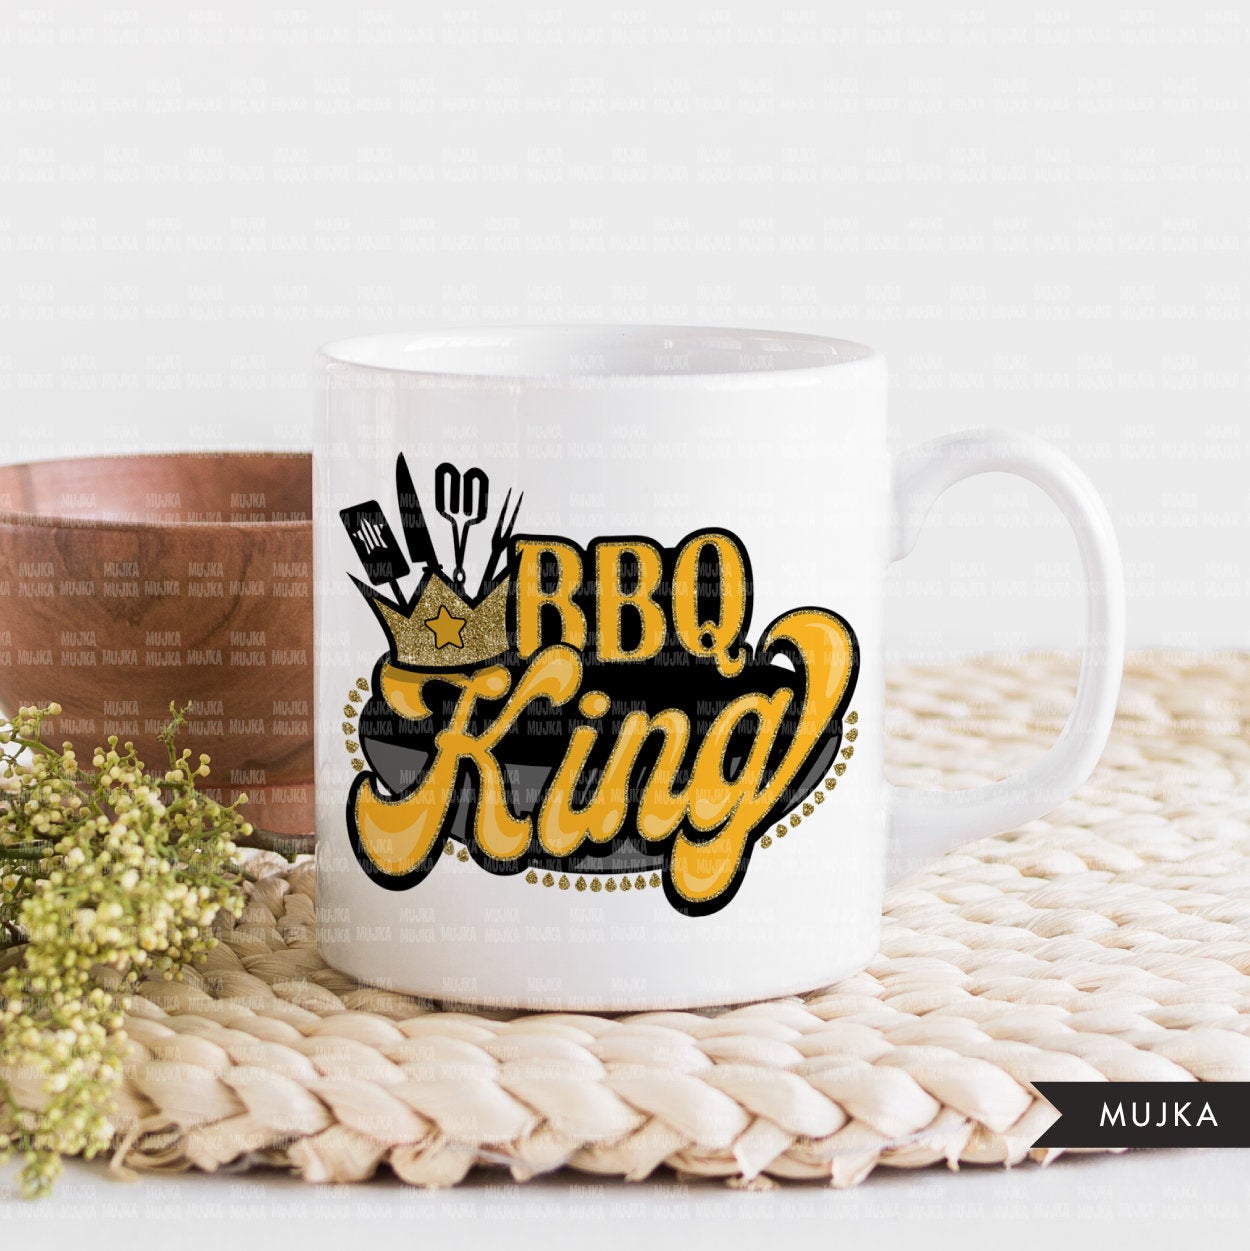 BBQ KING, bbq clipart, Grill master sublimation designs, King of bbq graphics, picnic designs, bbq king crown png digital download